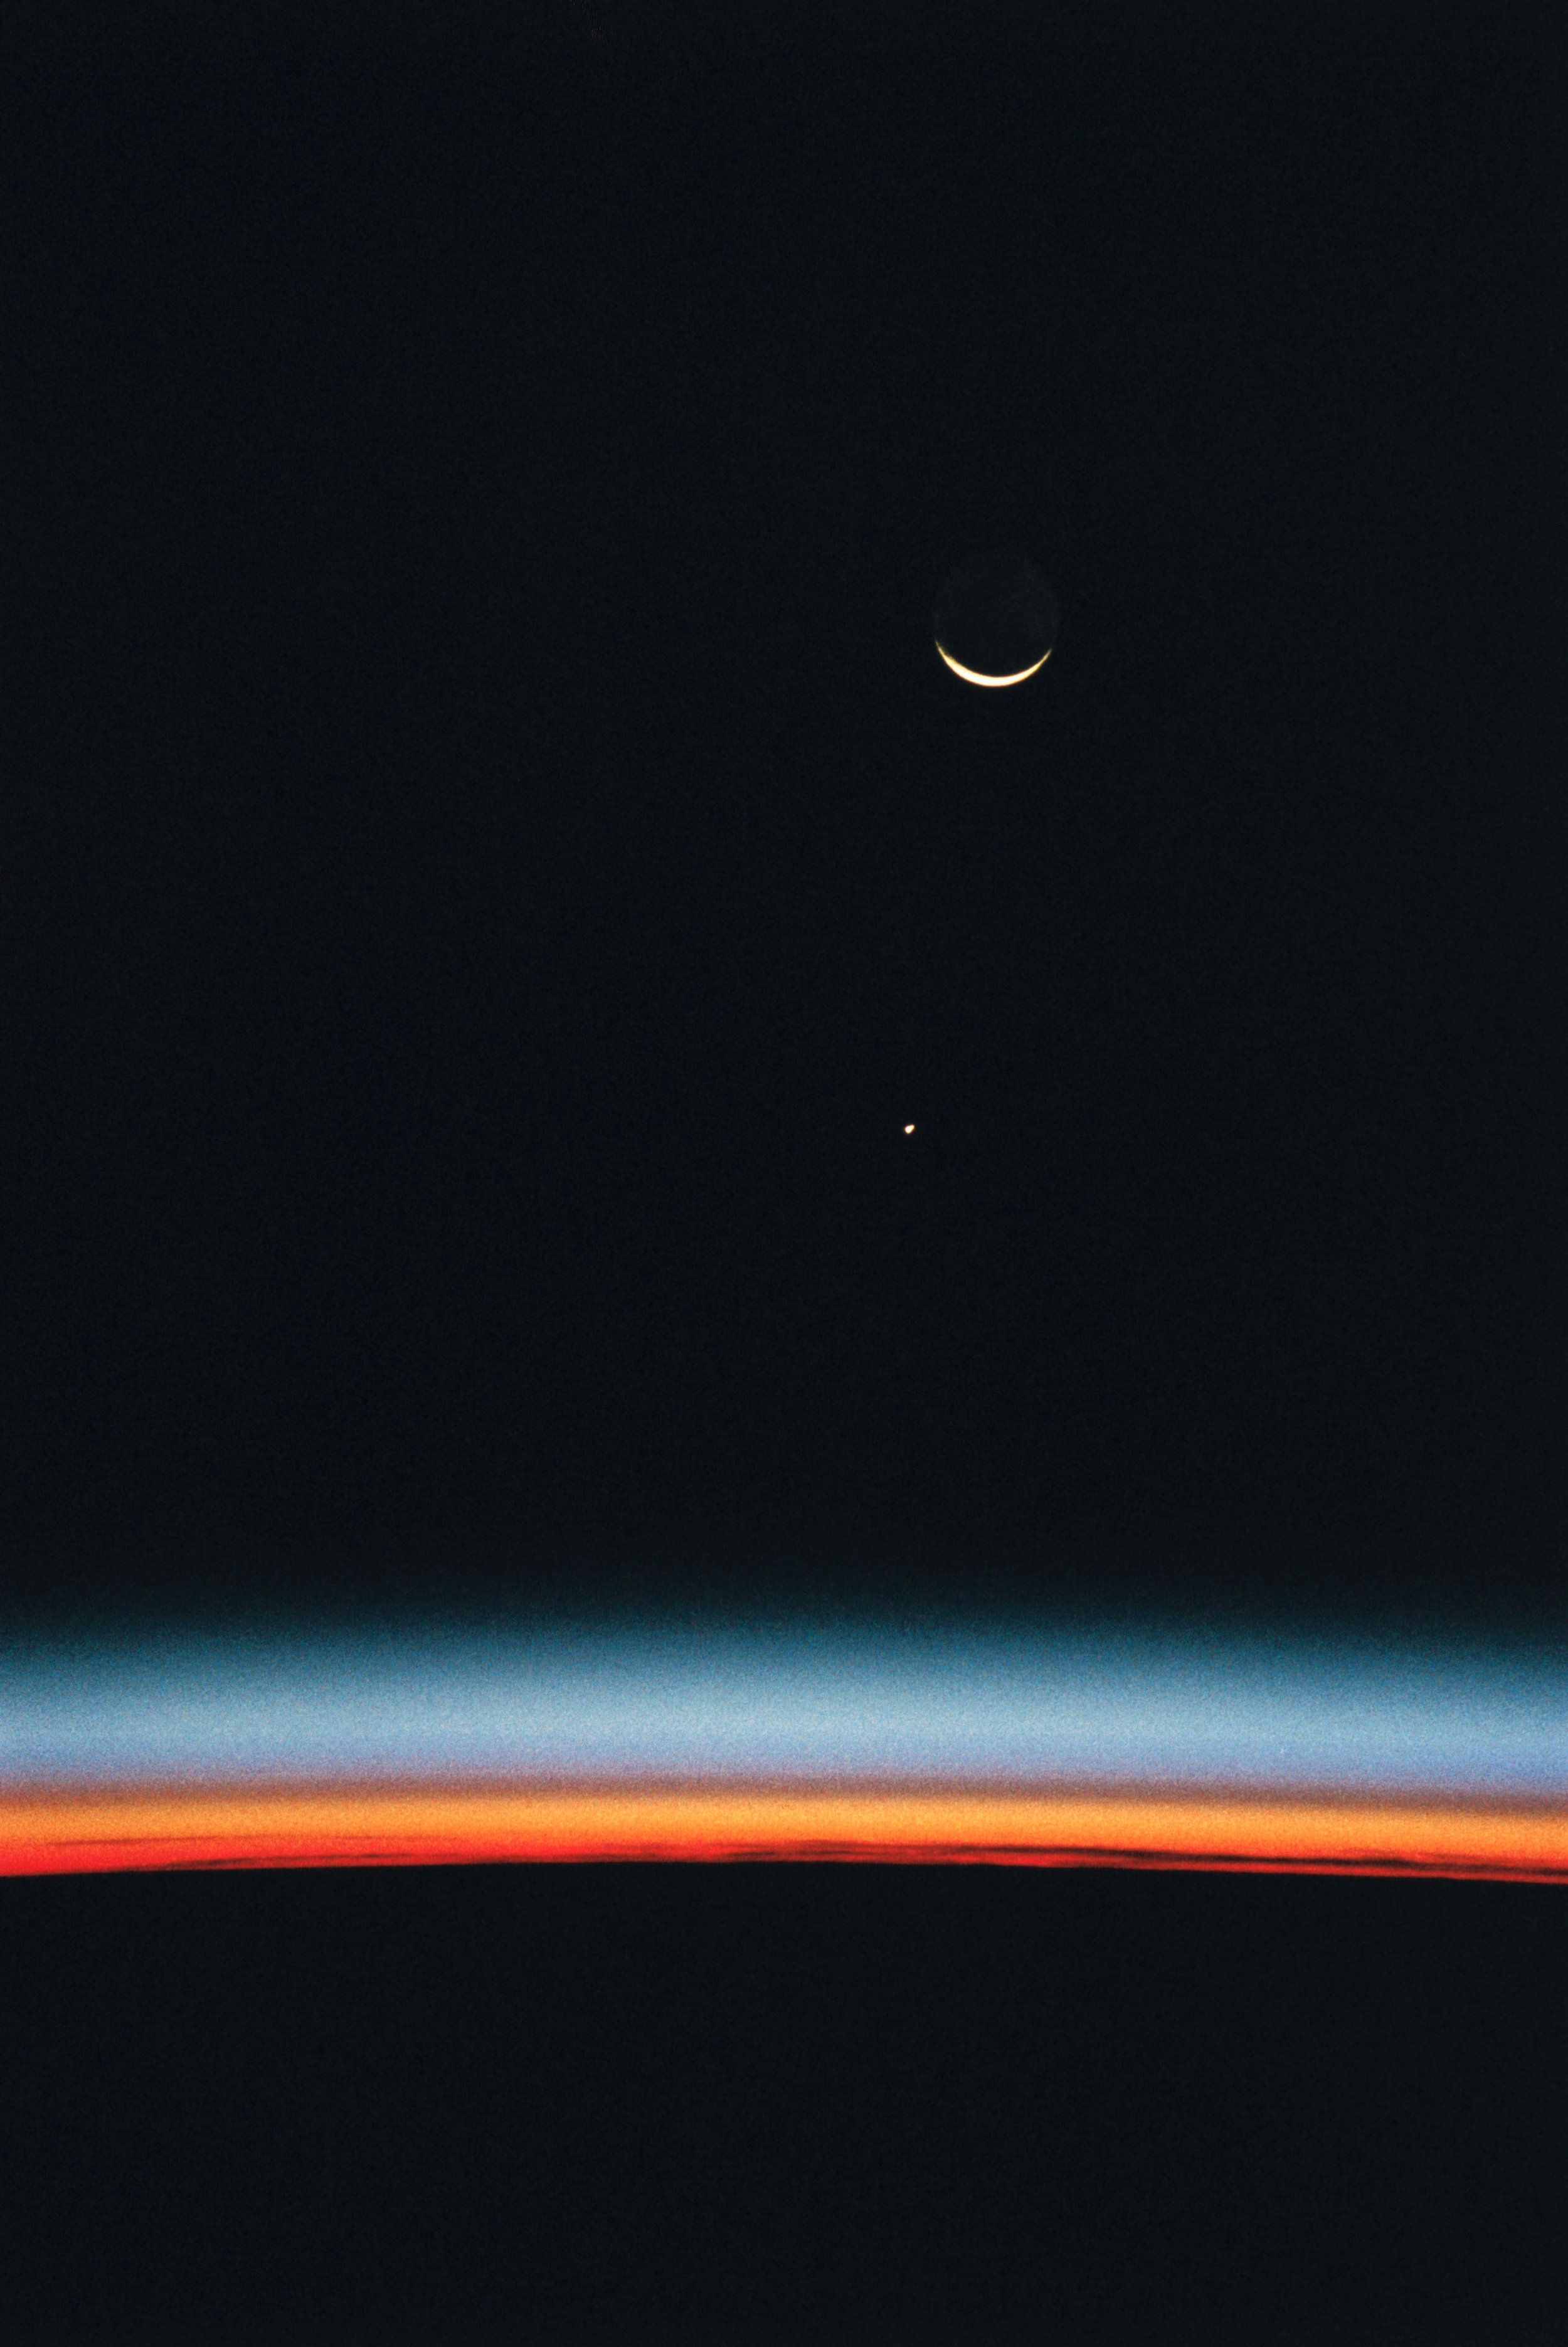 Hubble_Space_Telescope_with_an_Airglow_over_Earth's_Horizon,_Jupiter,_and_a_Crescent_Moon_(27514173904).jpg